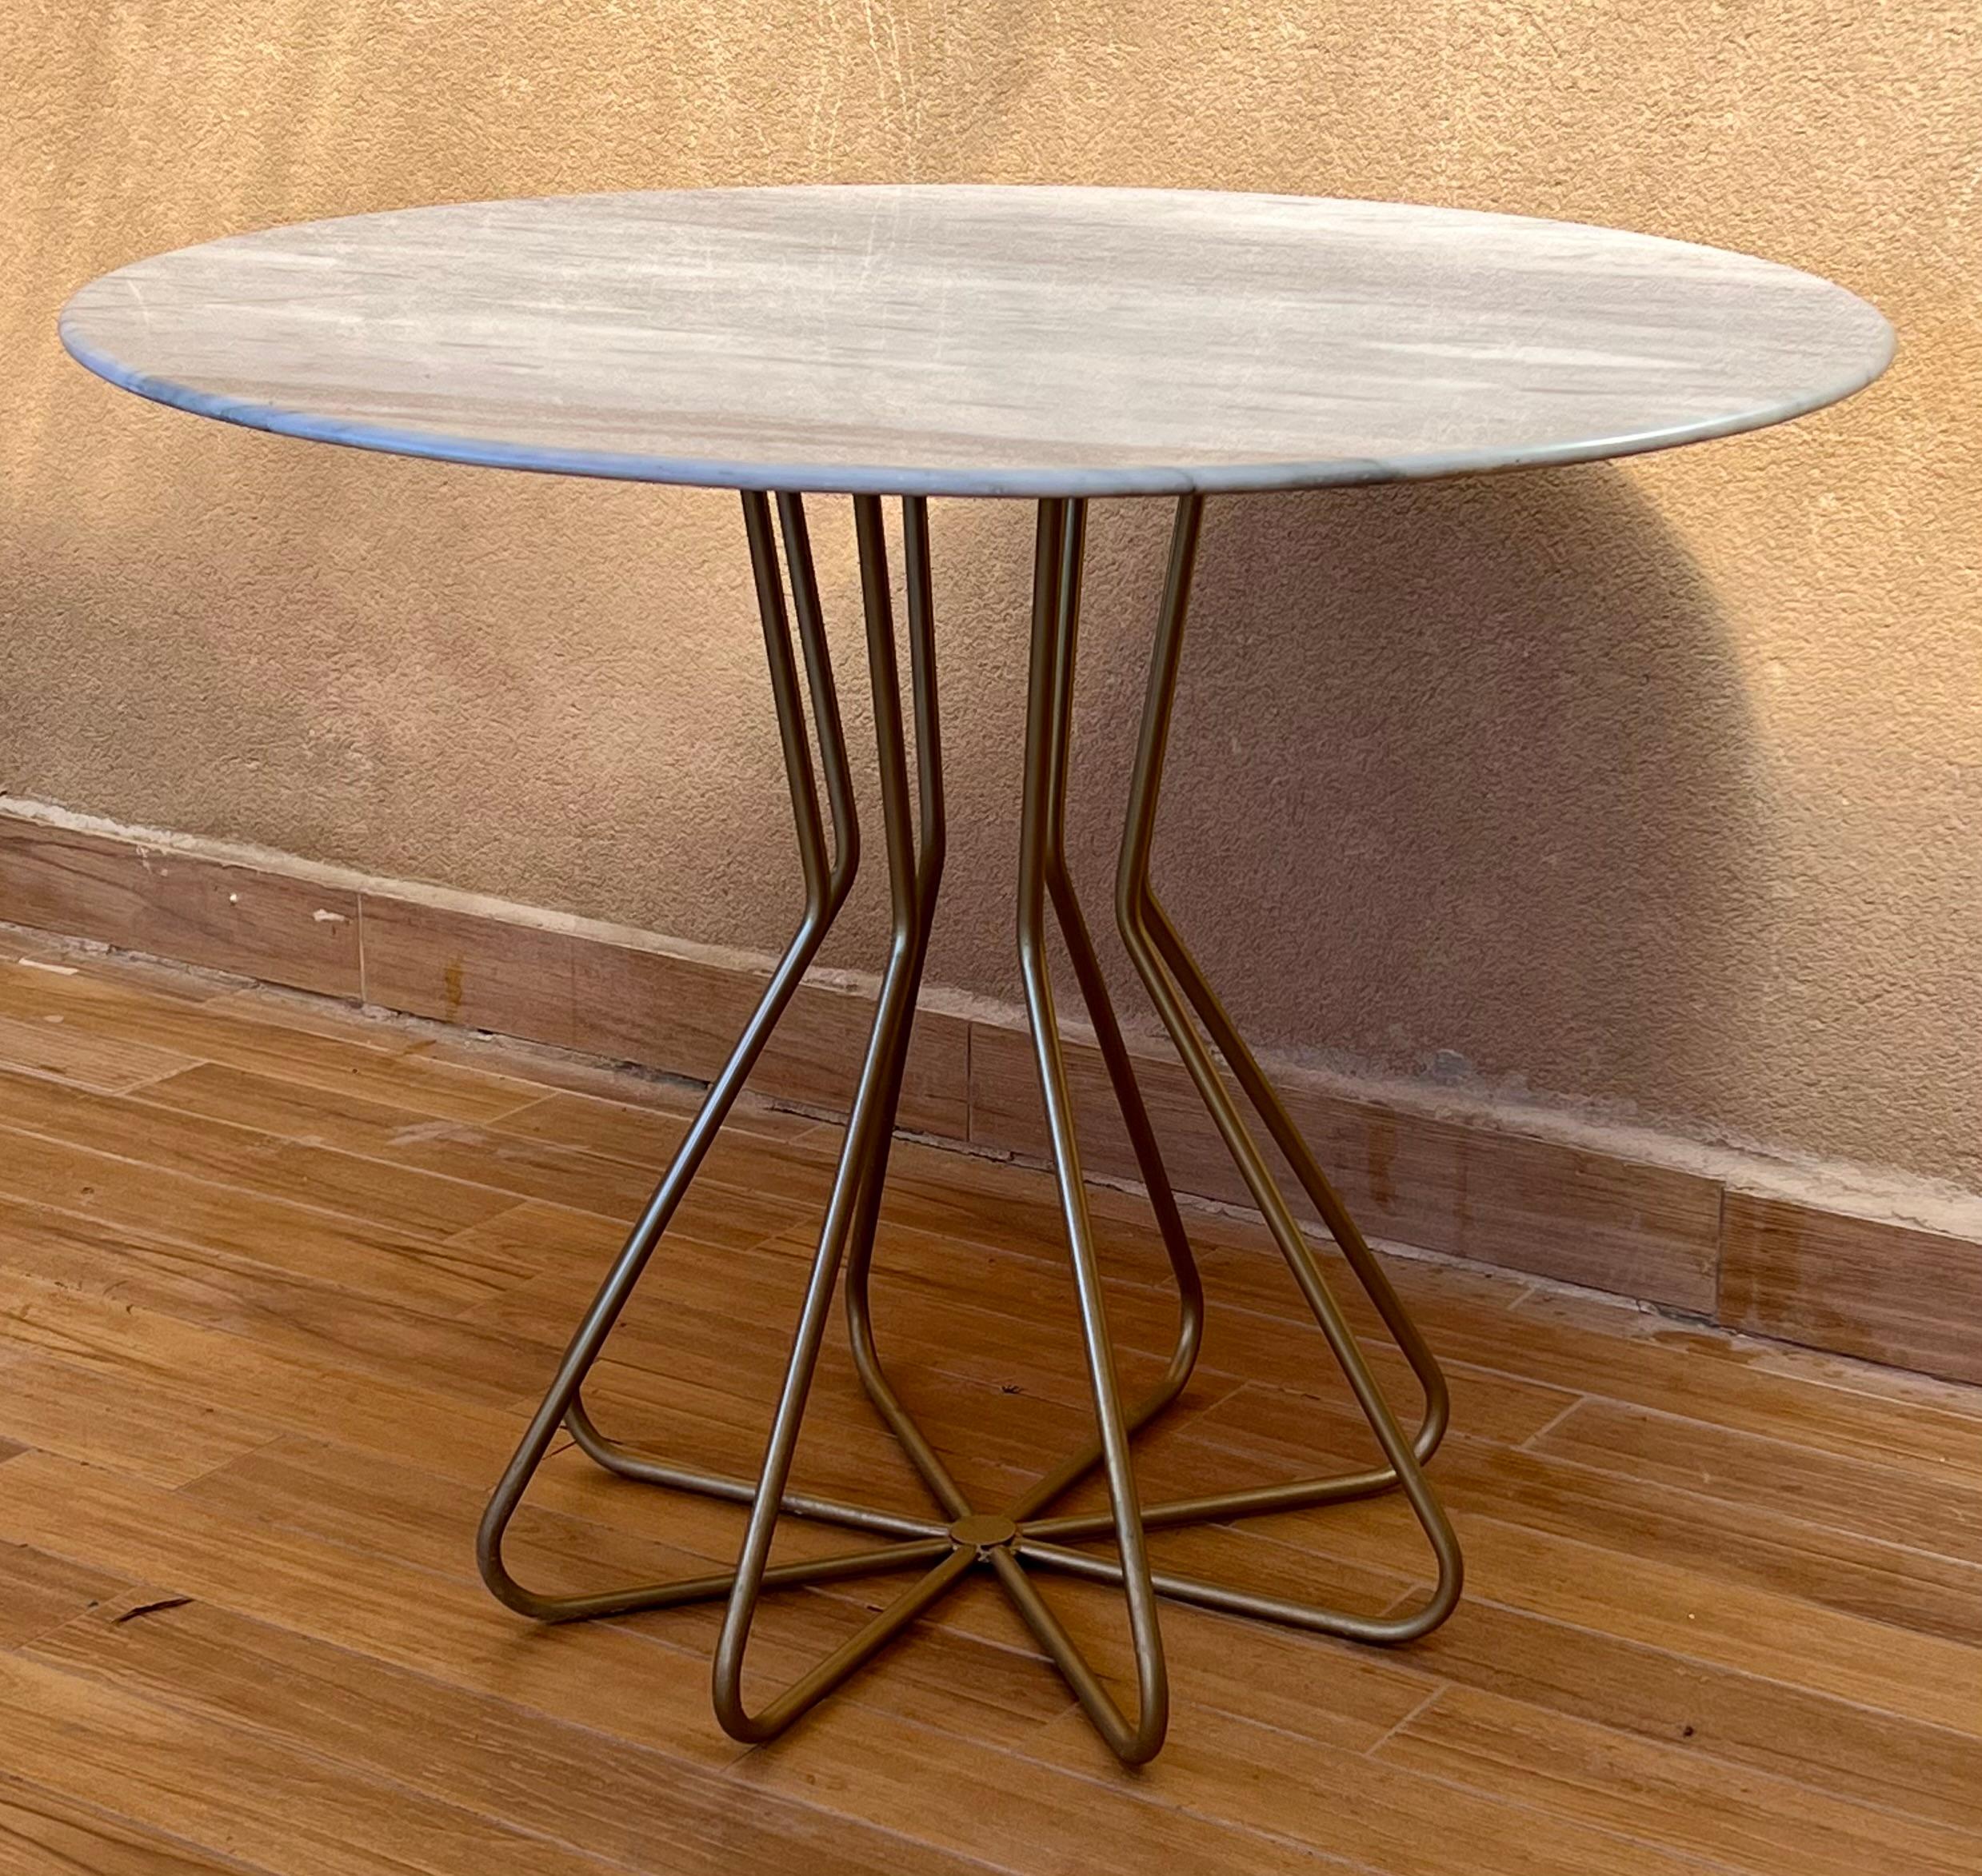 New metal fleur side table with wood top indoor and outdoor
You can choose color base and top materials like glass, marble, wood or metal.